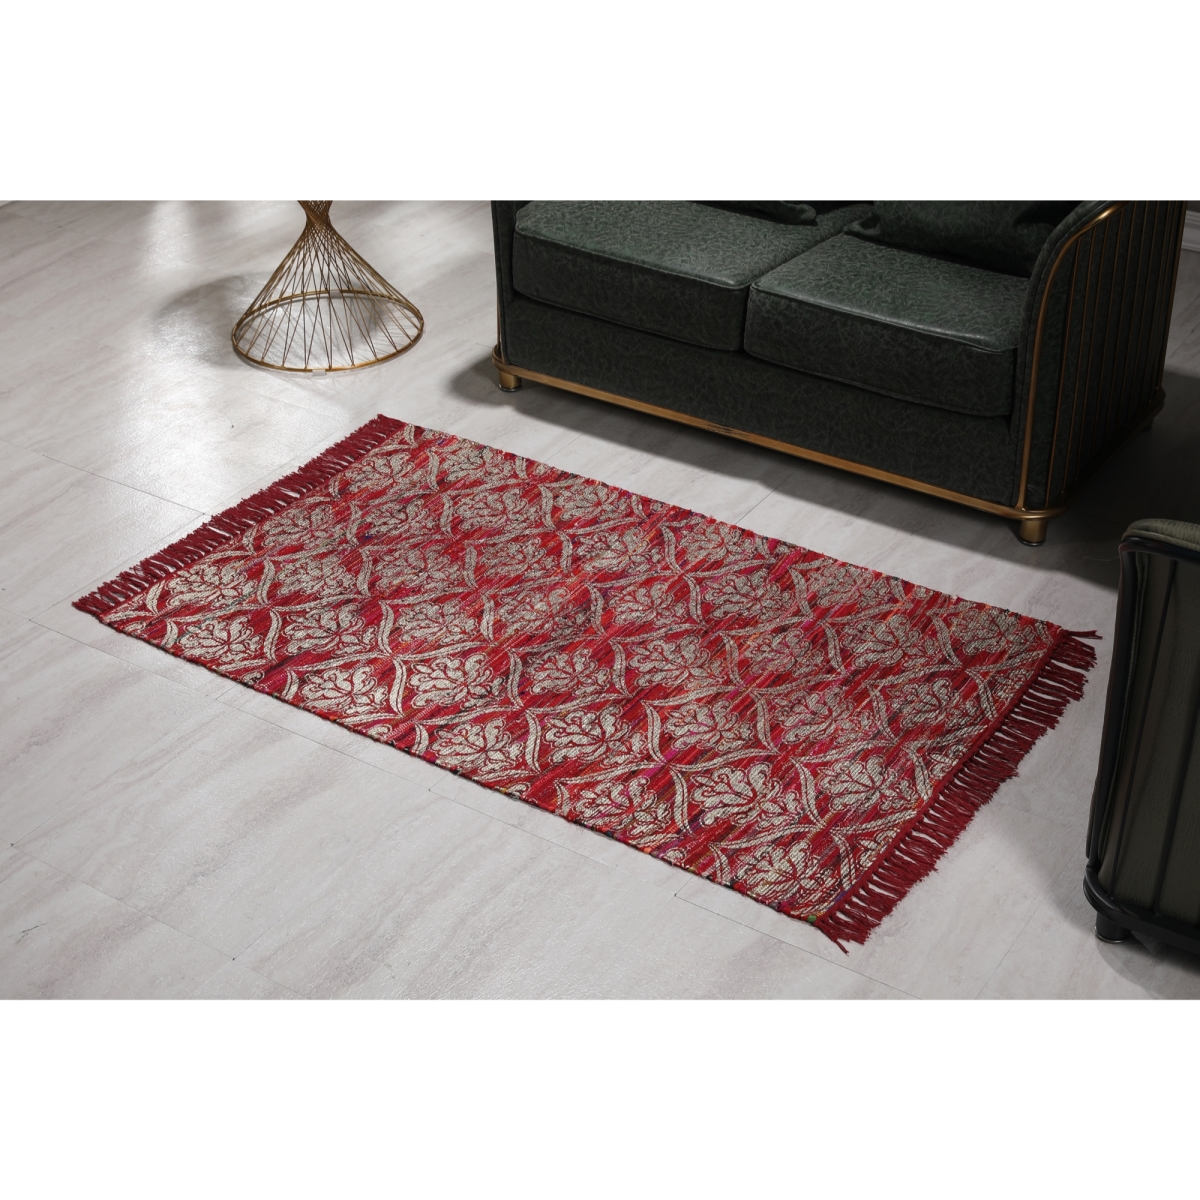 Whtxr639-m 3 X 5 Ft. Handwoven Polyester & Cotton Rug With Metallic Print, Red & White